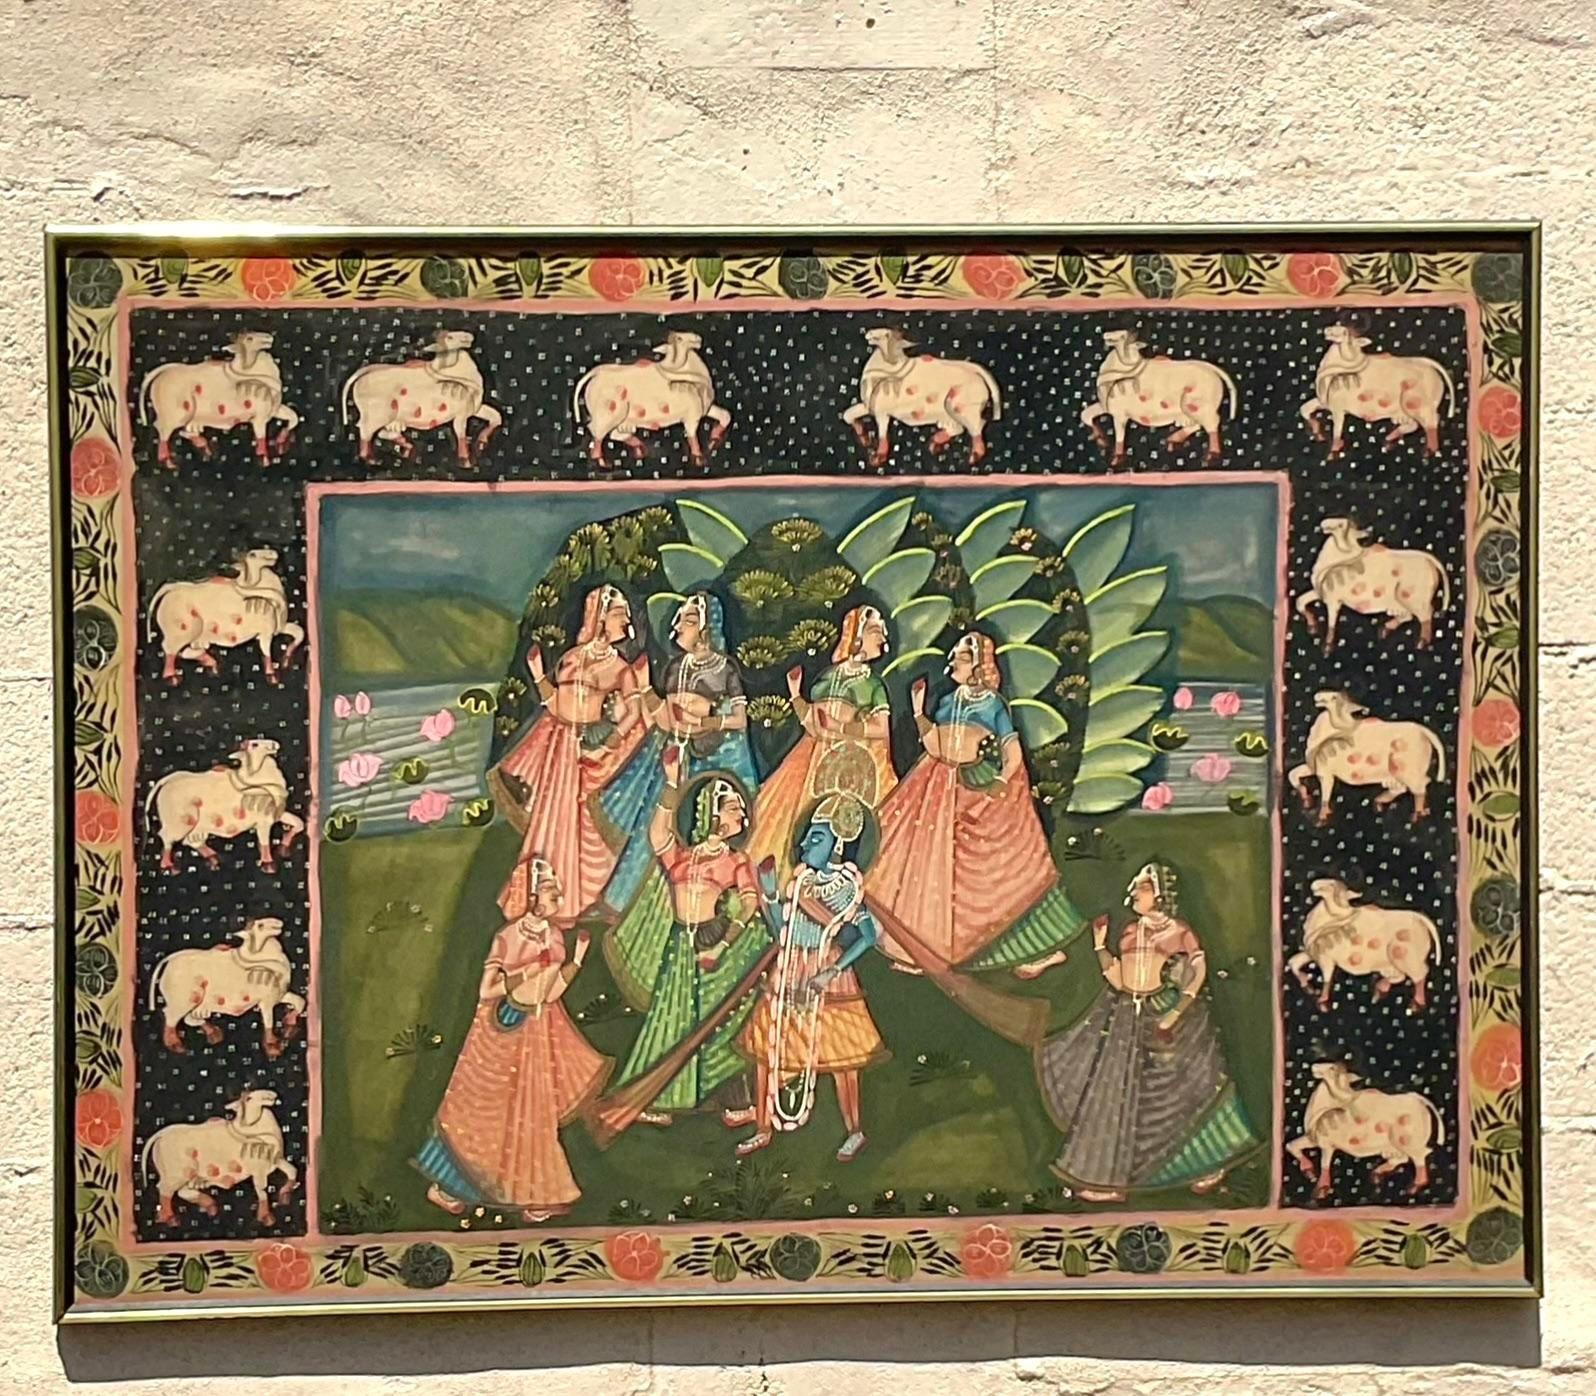 A fabulous vintage Boho Original oil painting on silk. A chic storied Indian Pishwaa in deep rich colors. A lot of extra goats for extra good luck! Acquired from a Palm Beach estate.